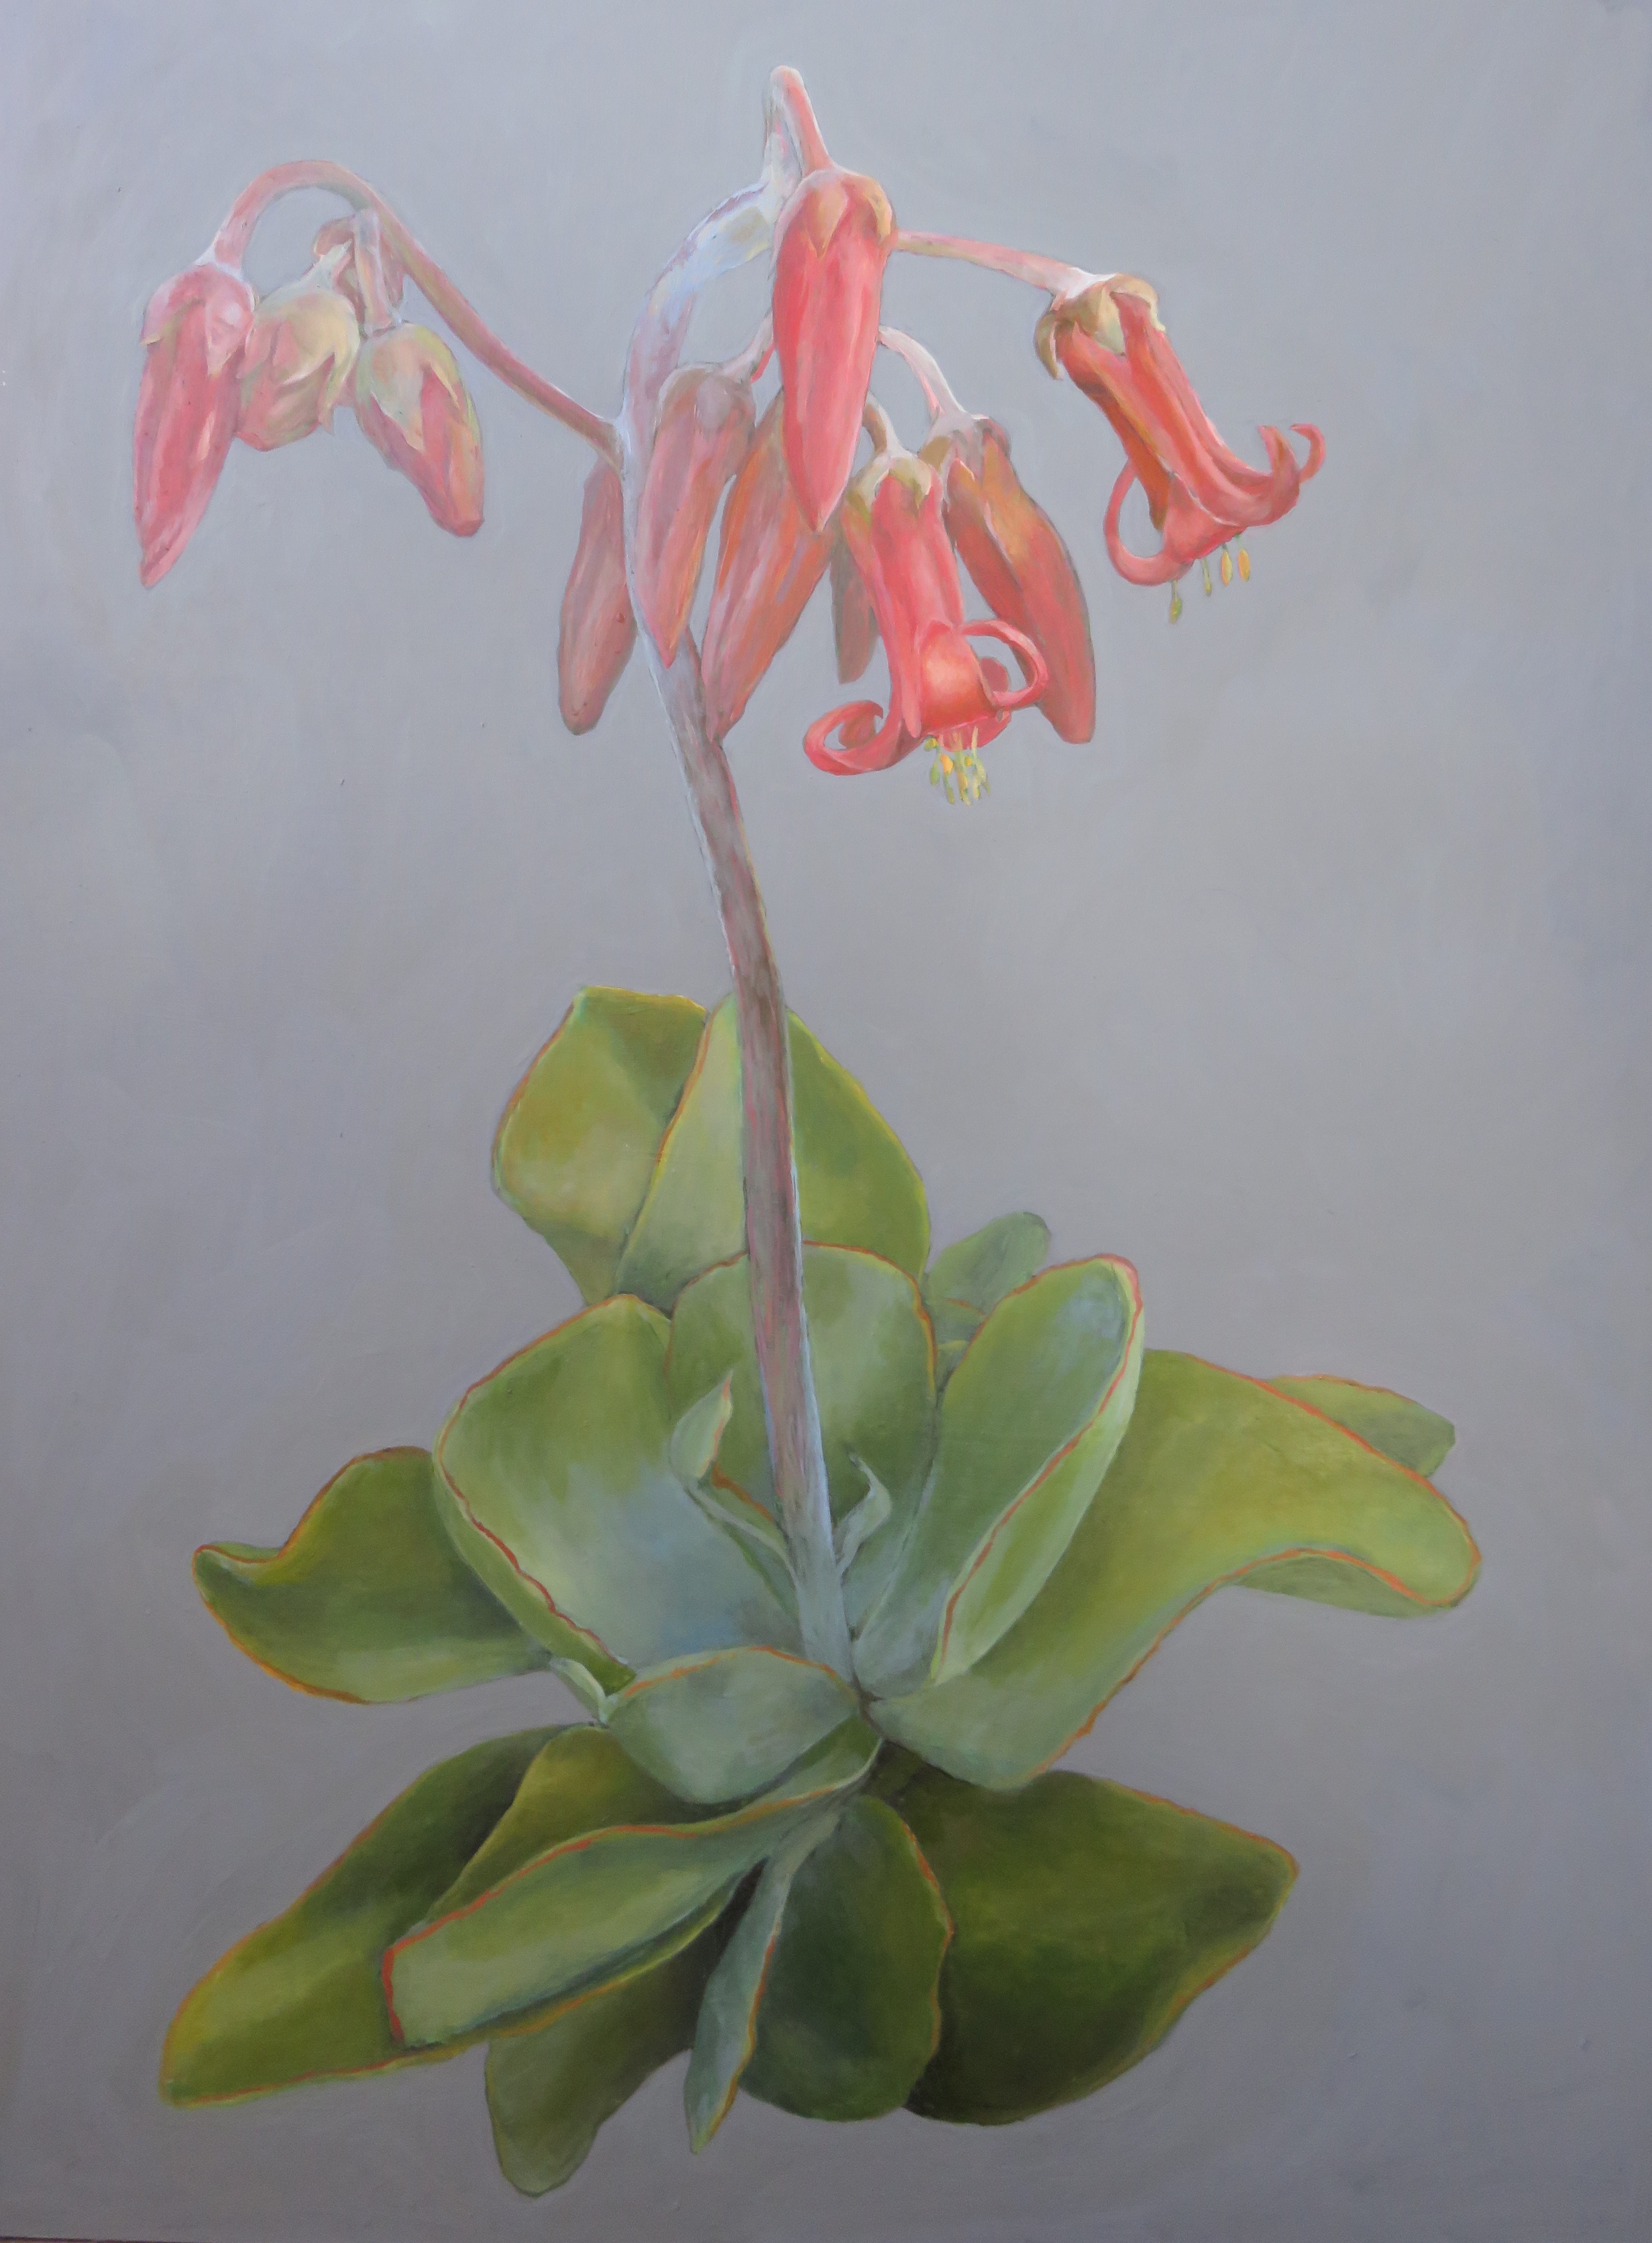 Cotyledon orbiculata painting August 2020, one of our indigenous medicinal plants.